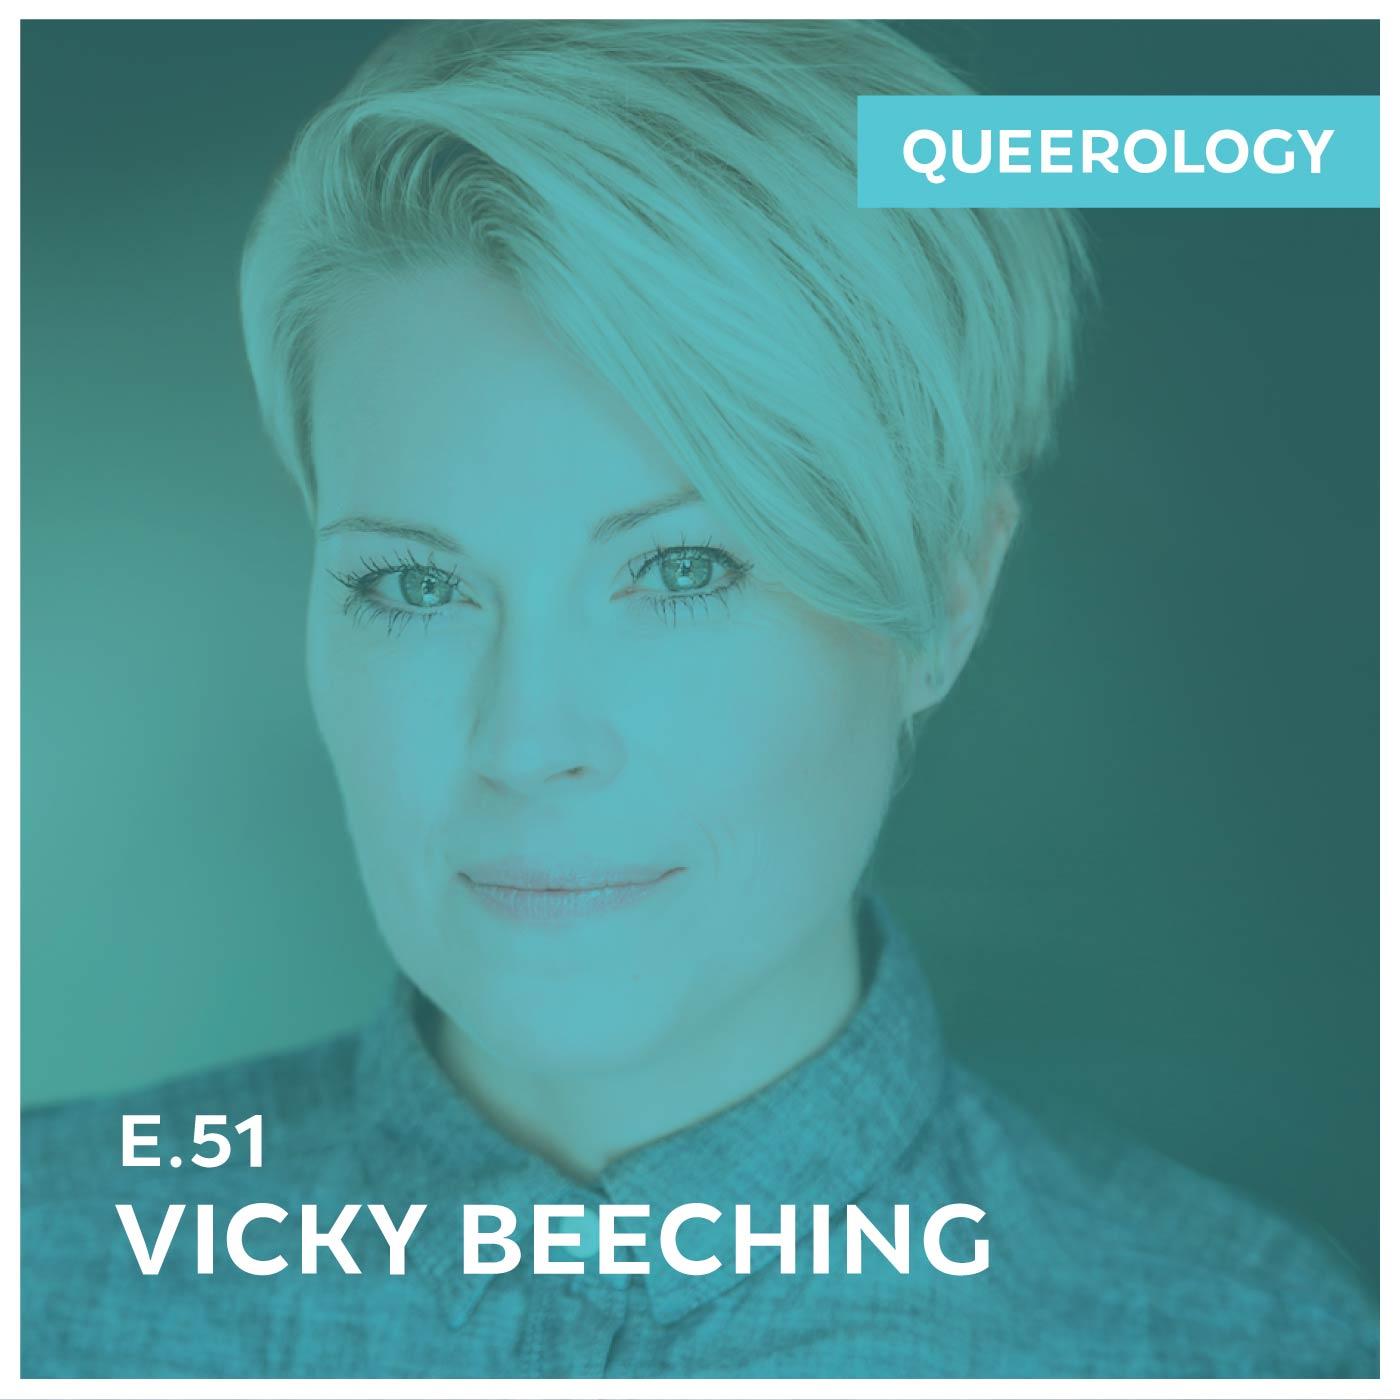 Vicky Beeching is Undivided - Episode 51